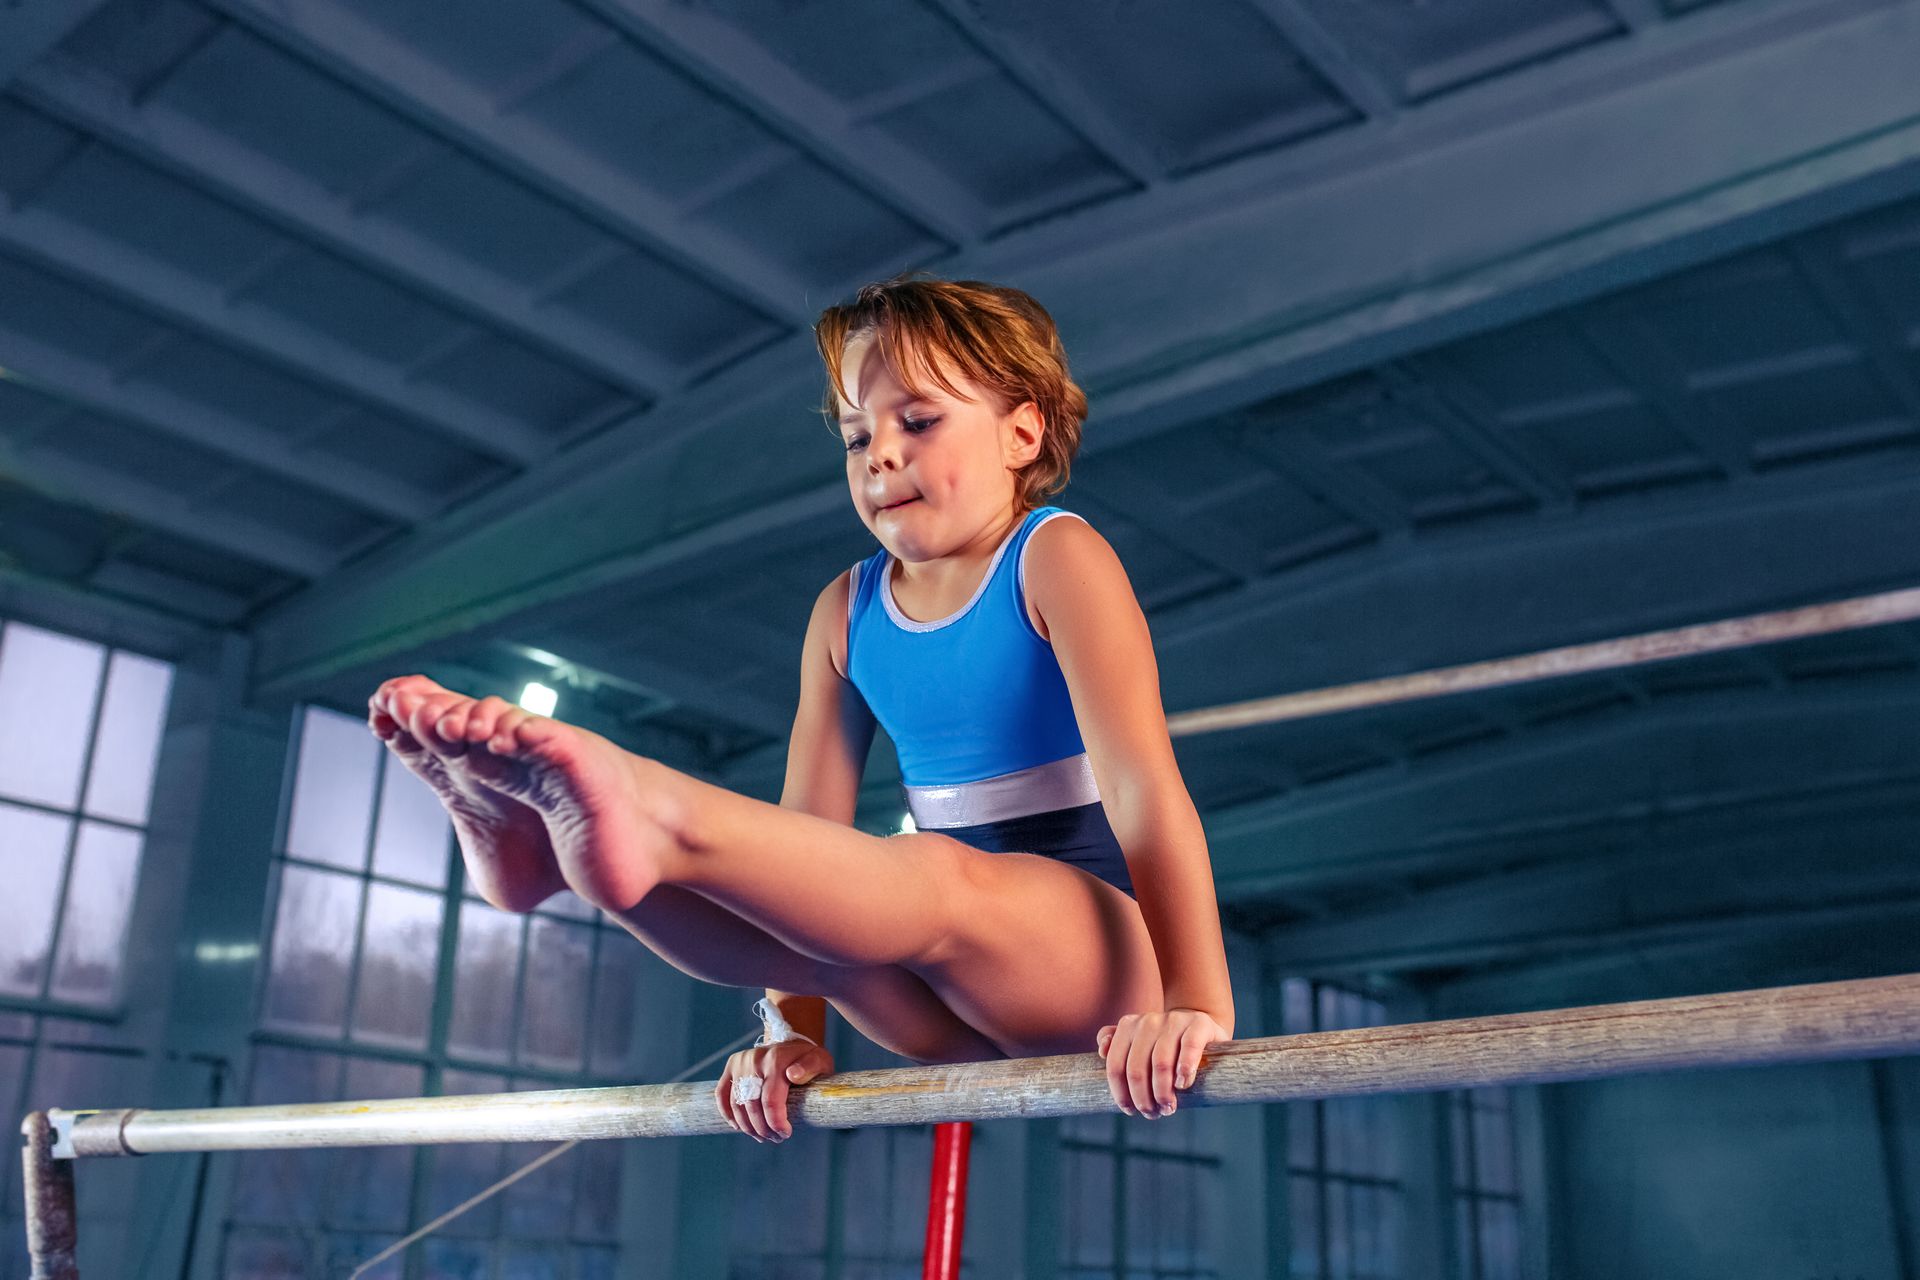 A young girl is sitting on a balance beam in a gym.